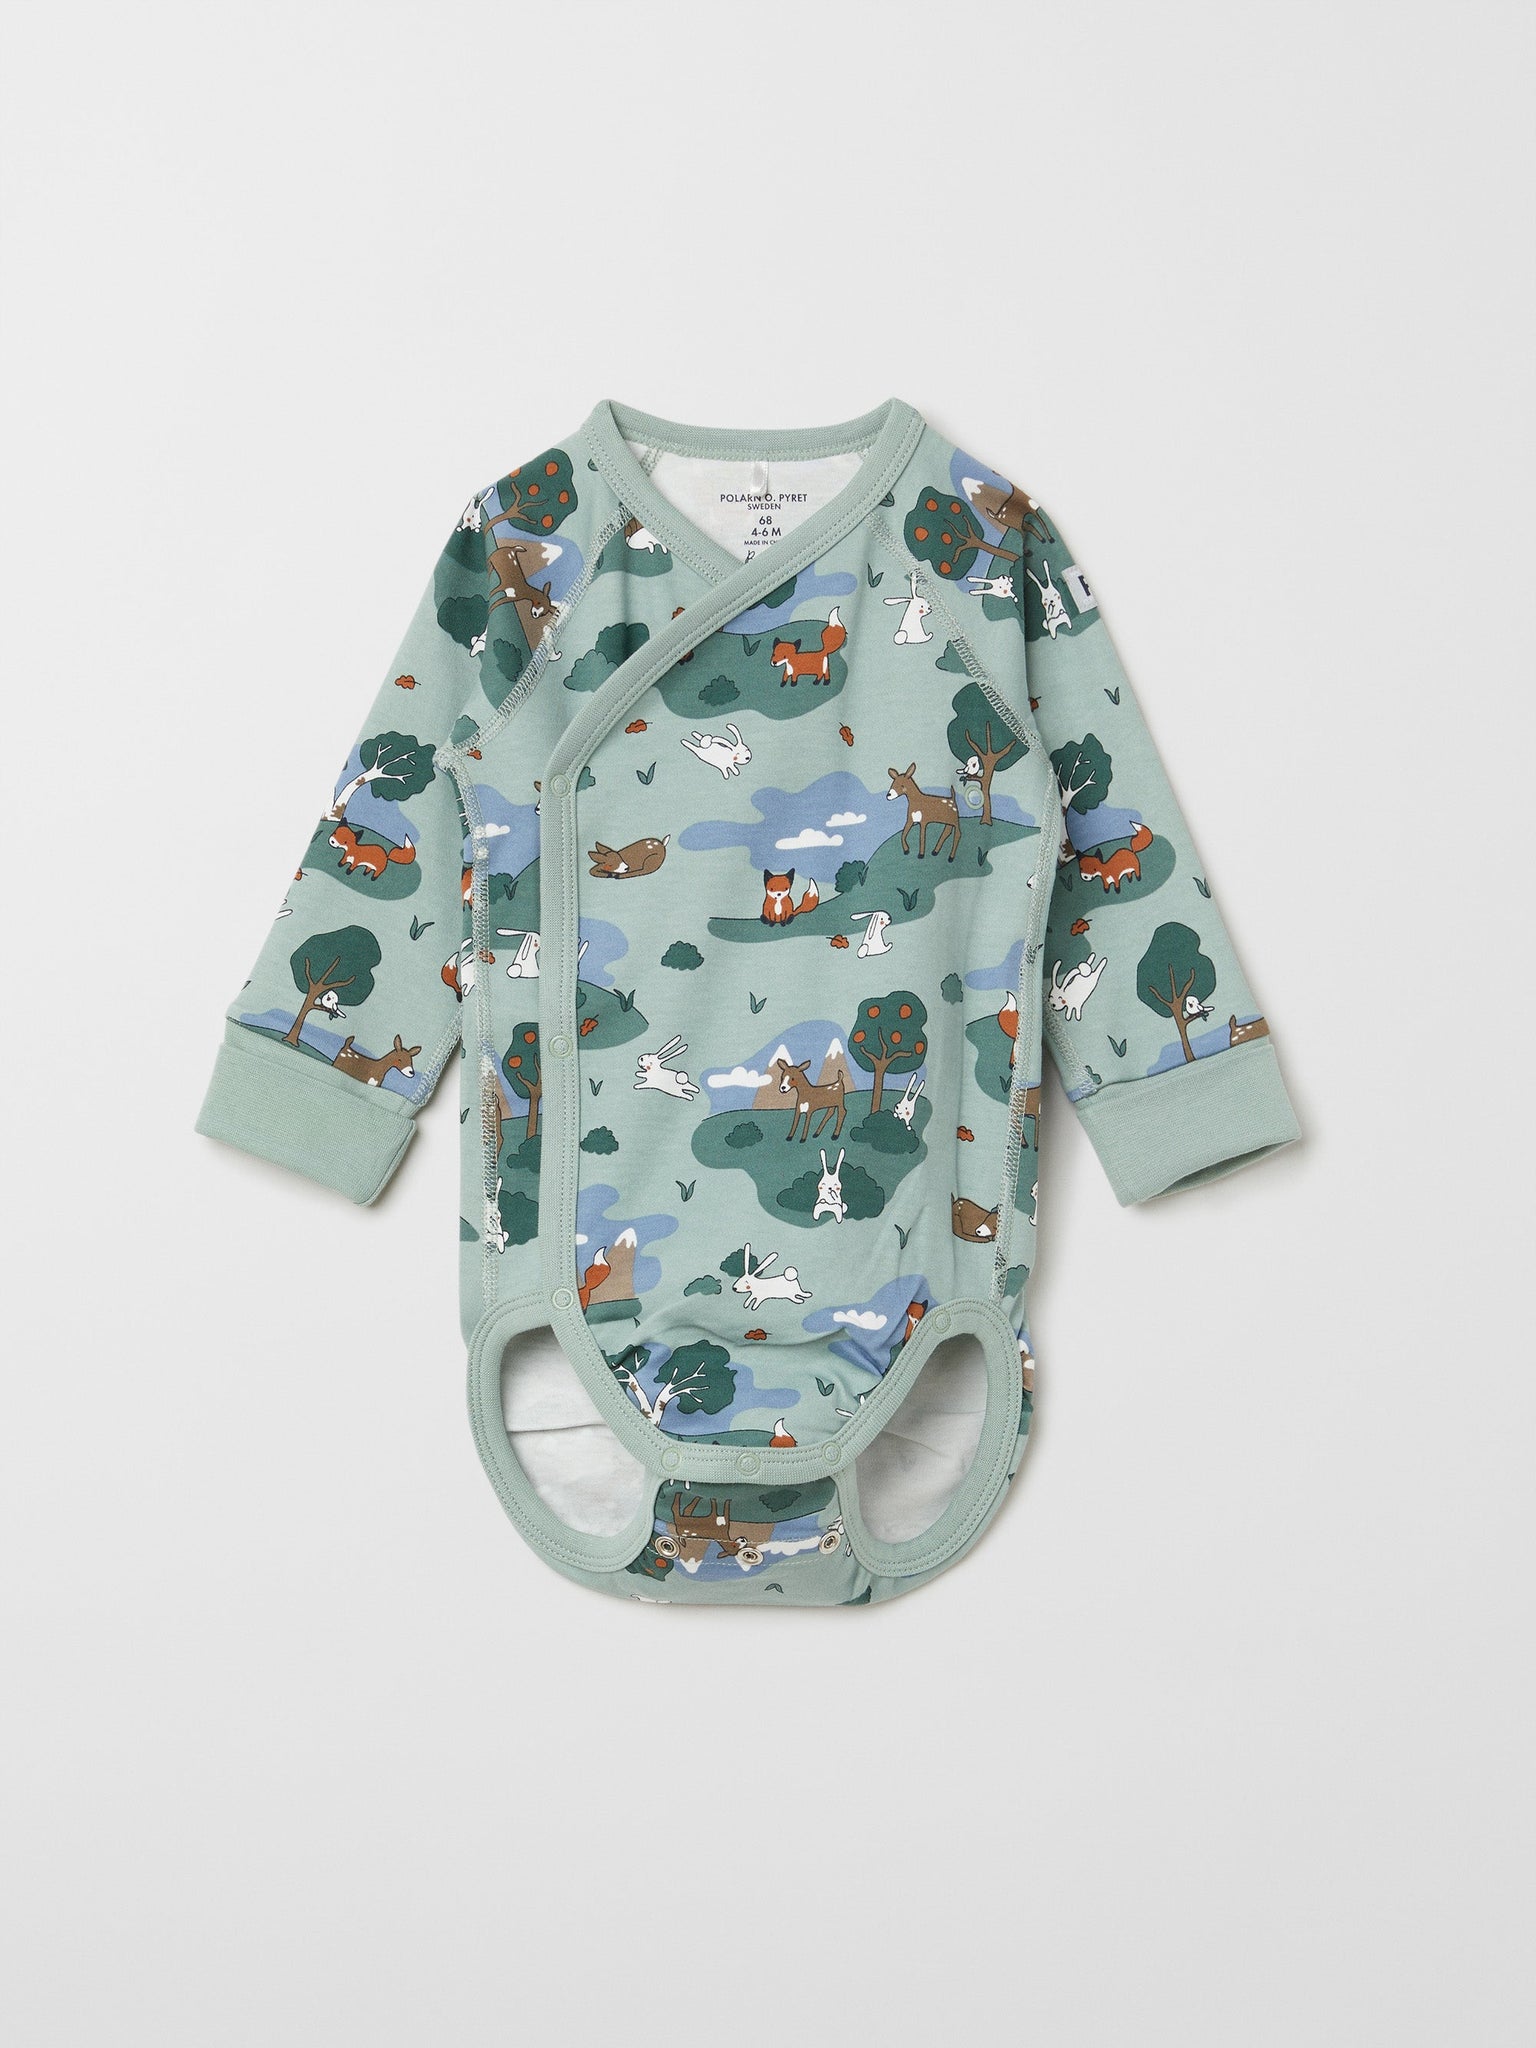 Organic Cotton Wraparound Babygrow from the Polarn O. Pyret baby collection. The best ethical baby clothes